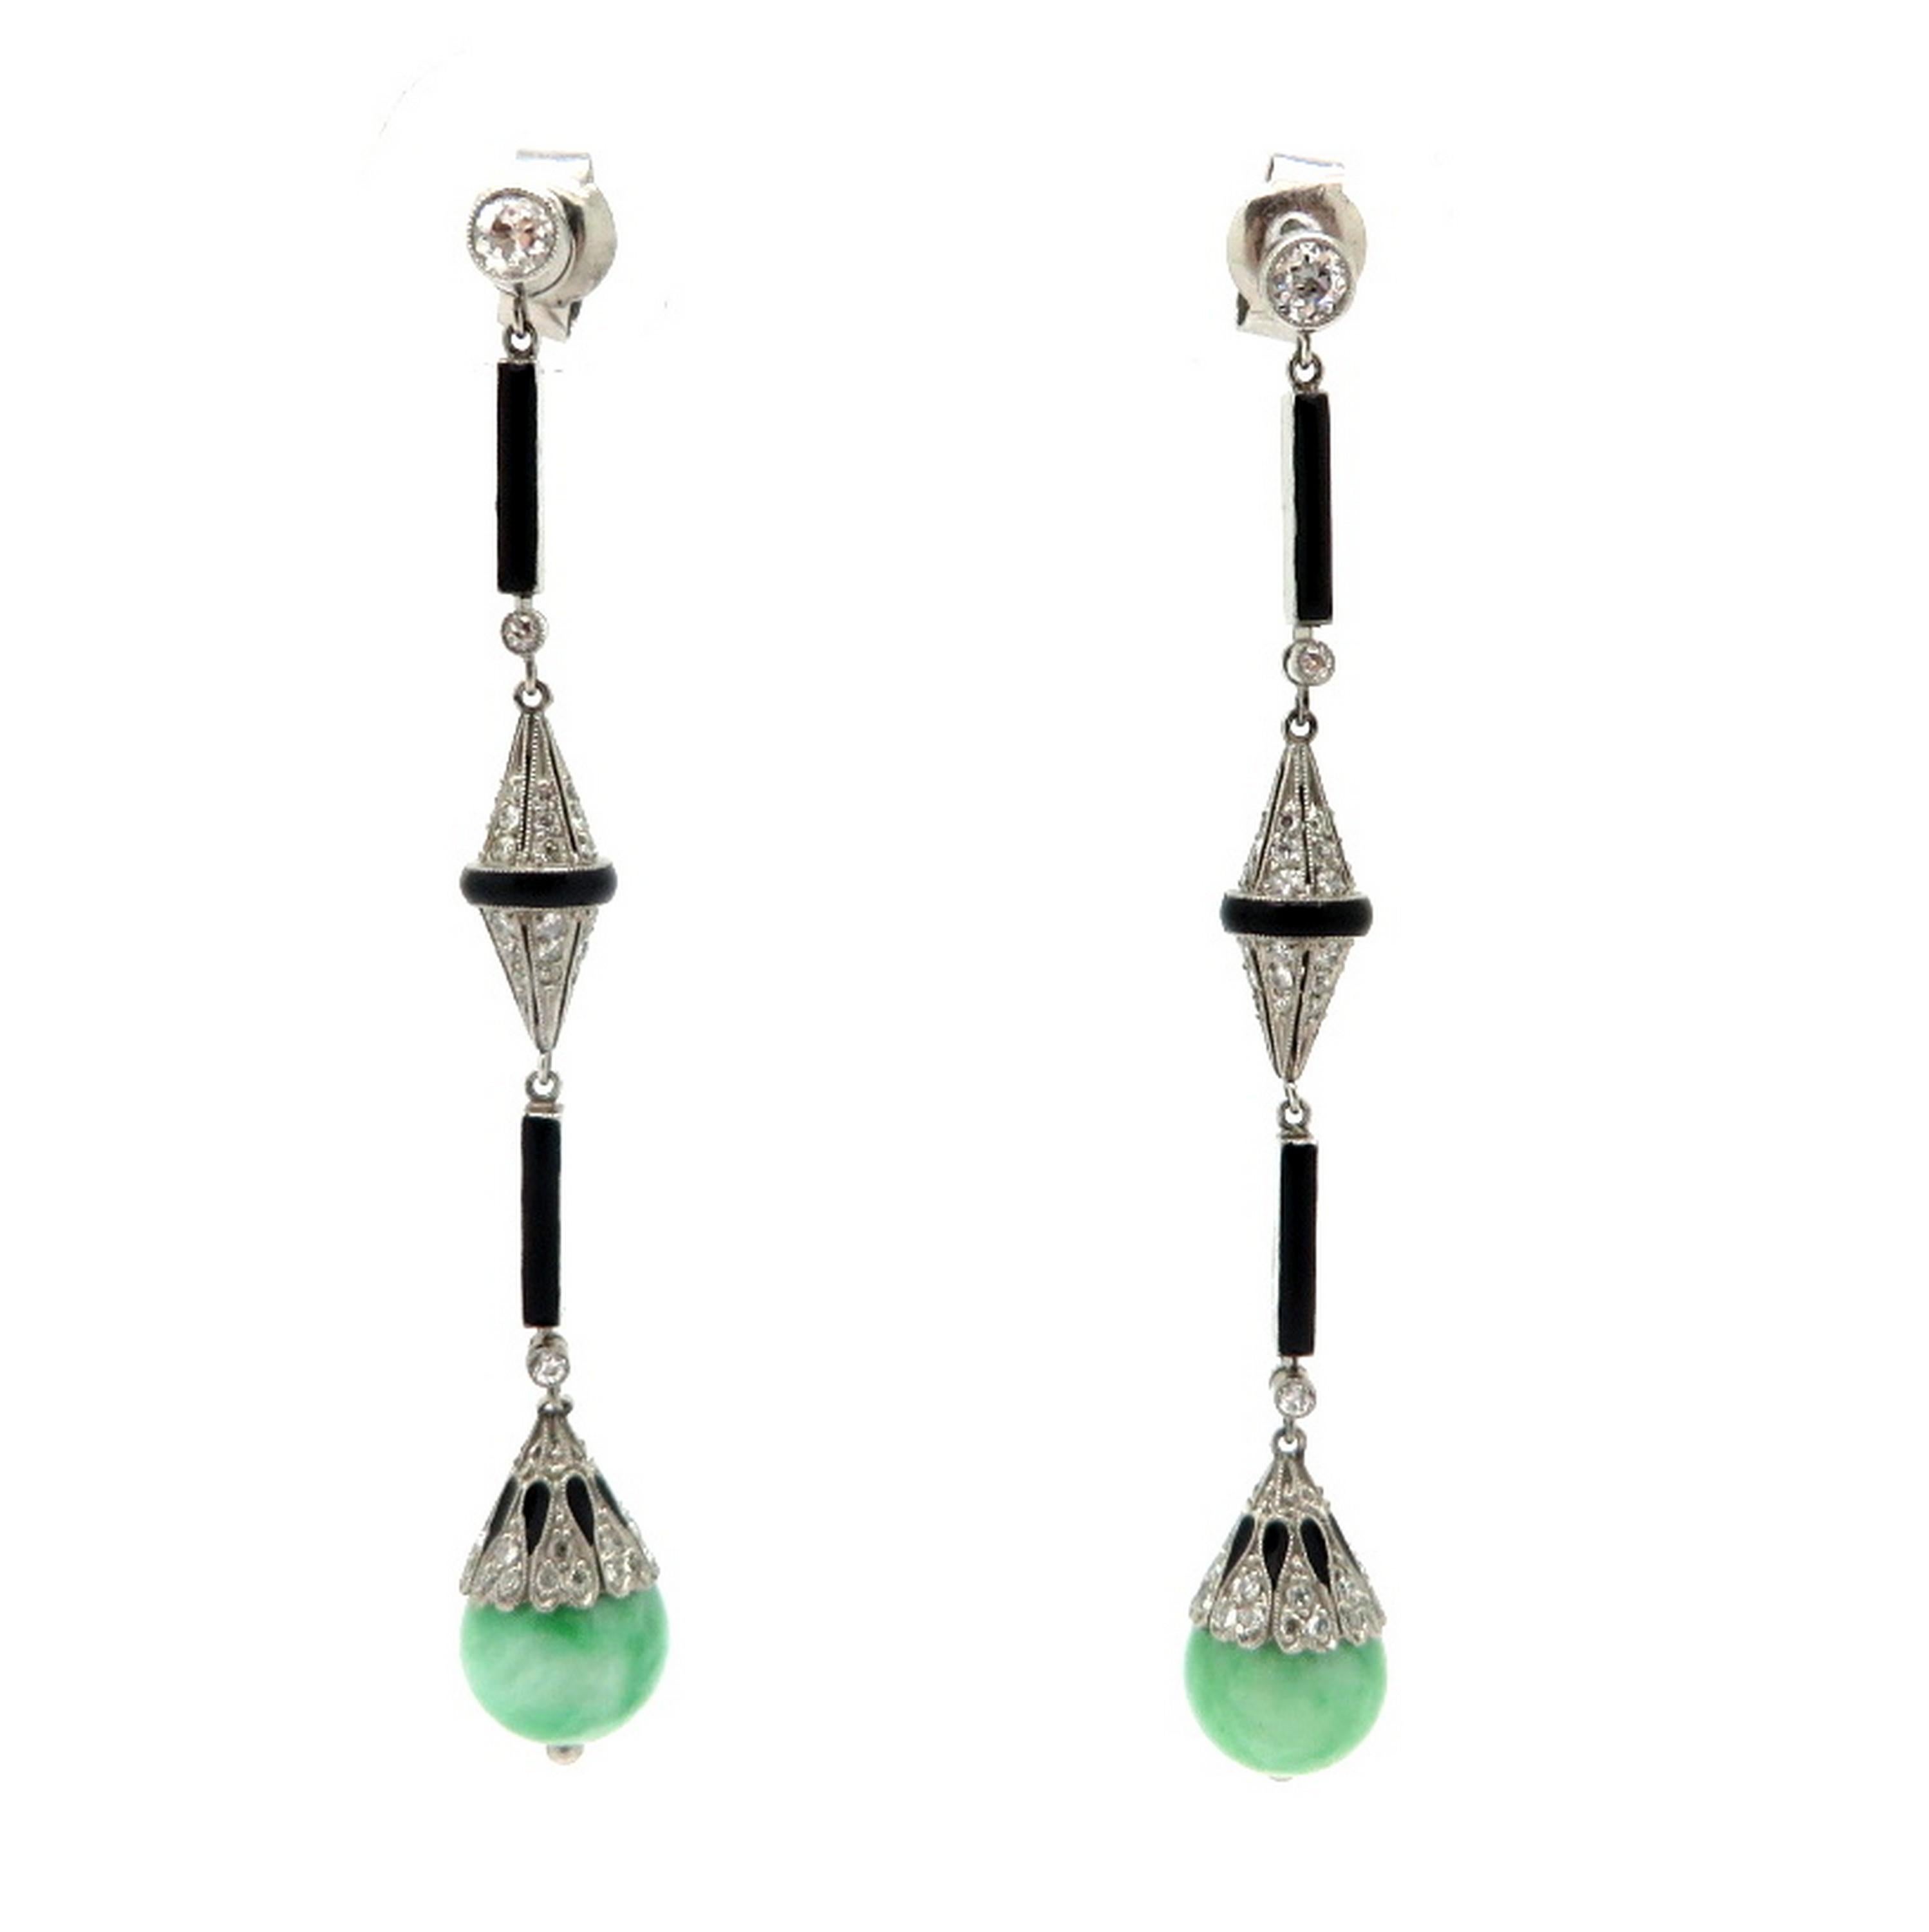 Platinum estate jade, diamond and onyx chandelier Art Deco style dangle earrings. Showcasing numerous Old European cut diamonds, with various measurements, weighing a combined total of approximately 1.17 carats. Accented with two fine quality round